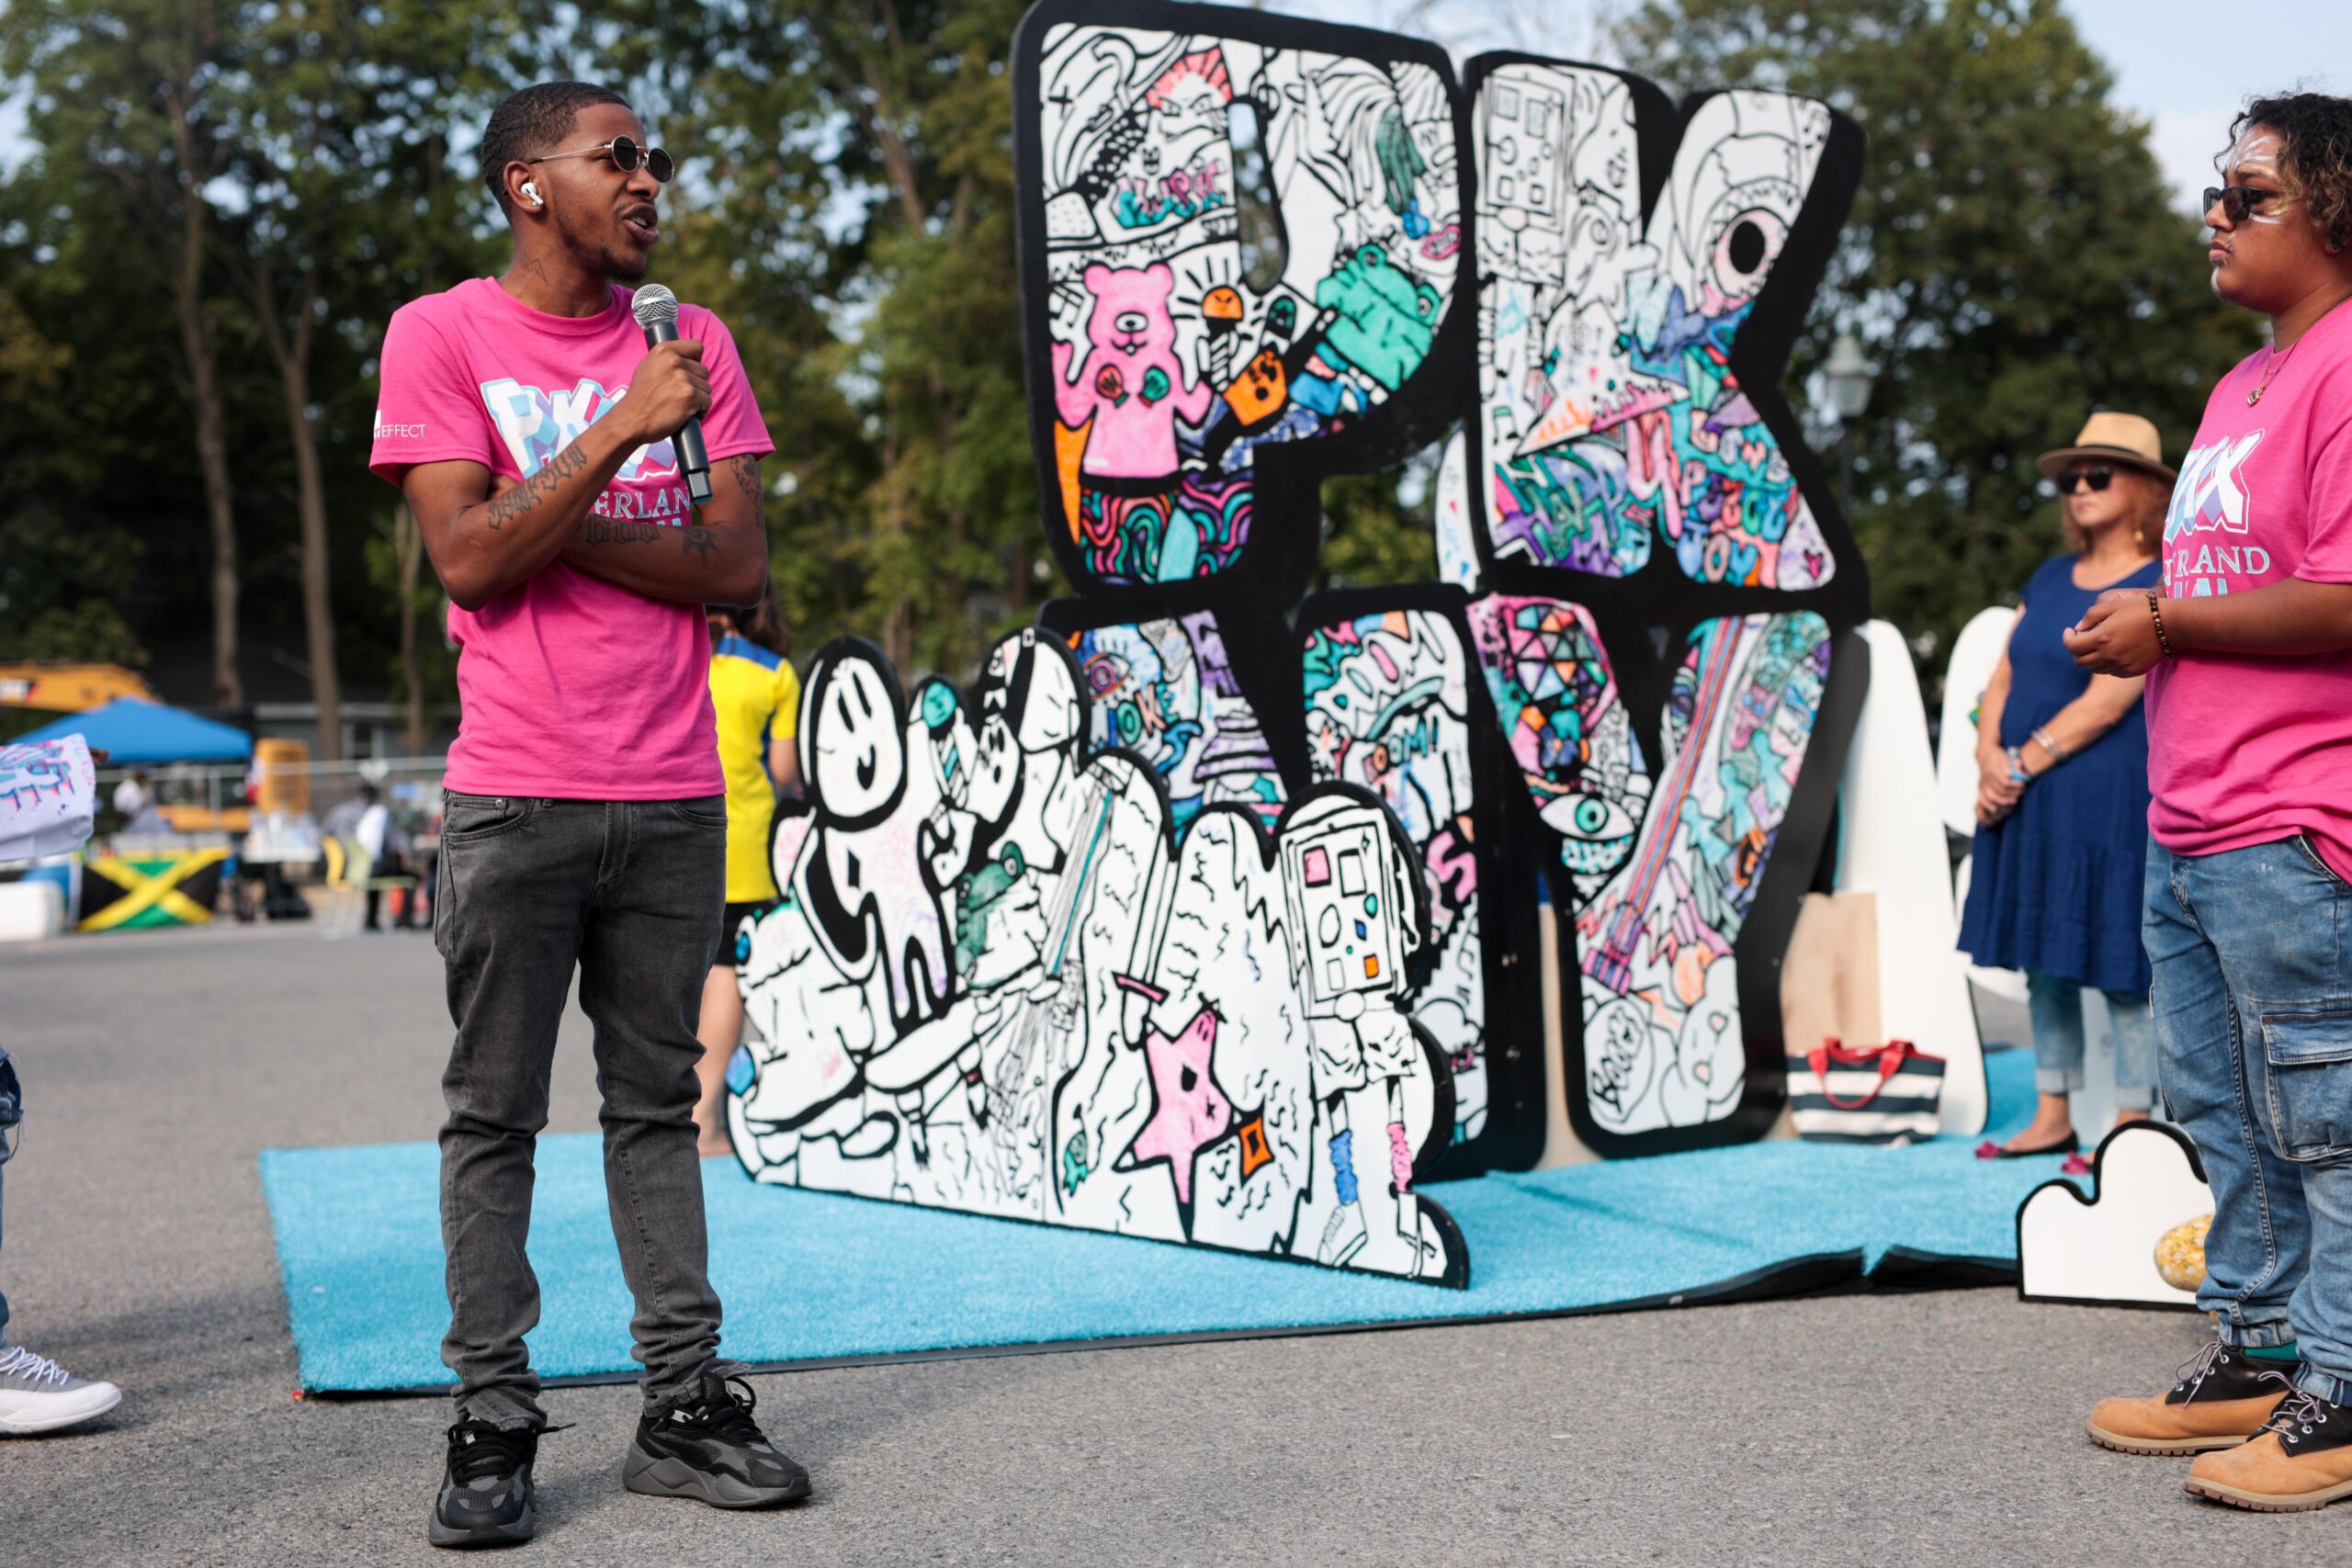 photo of a man in a pink shirt holding a microphone and talking while standing in front of an interactive art piece of the letters 